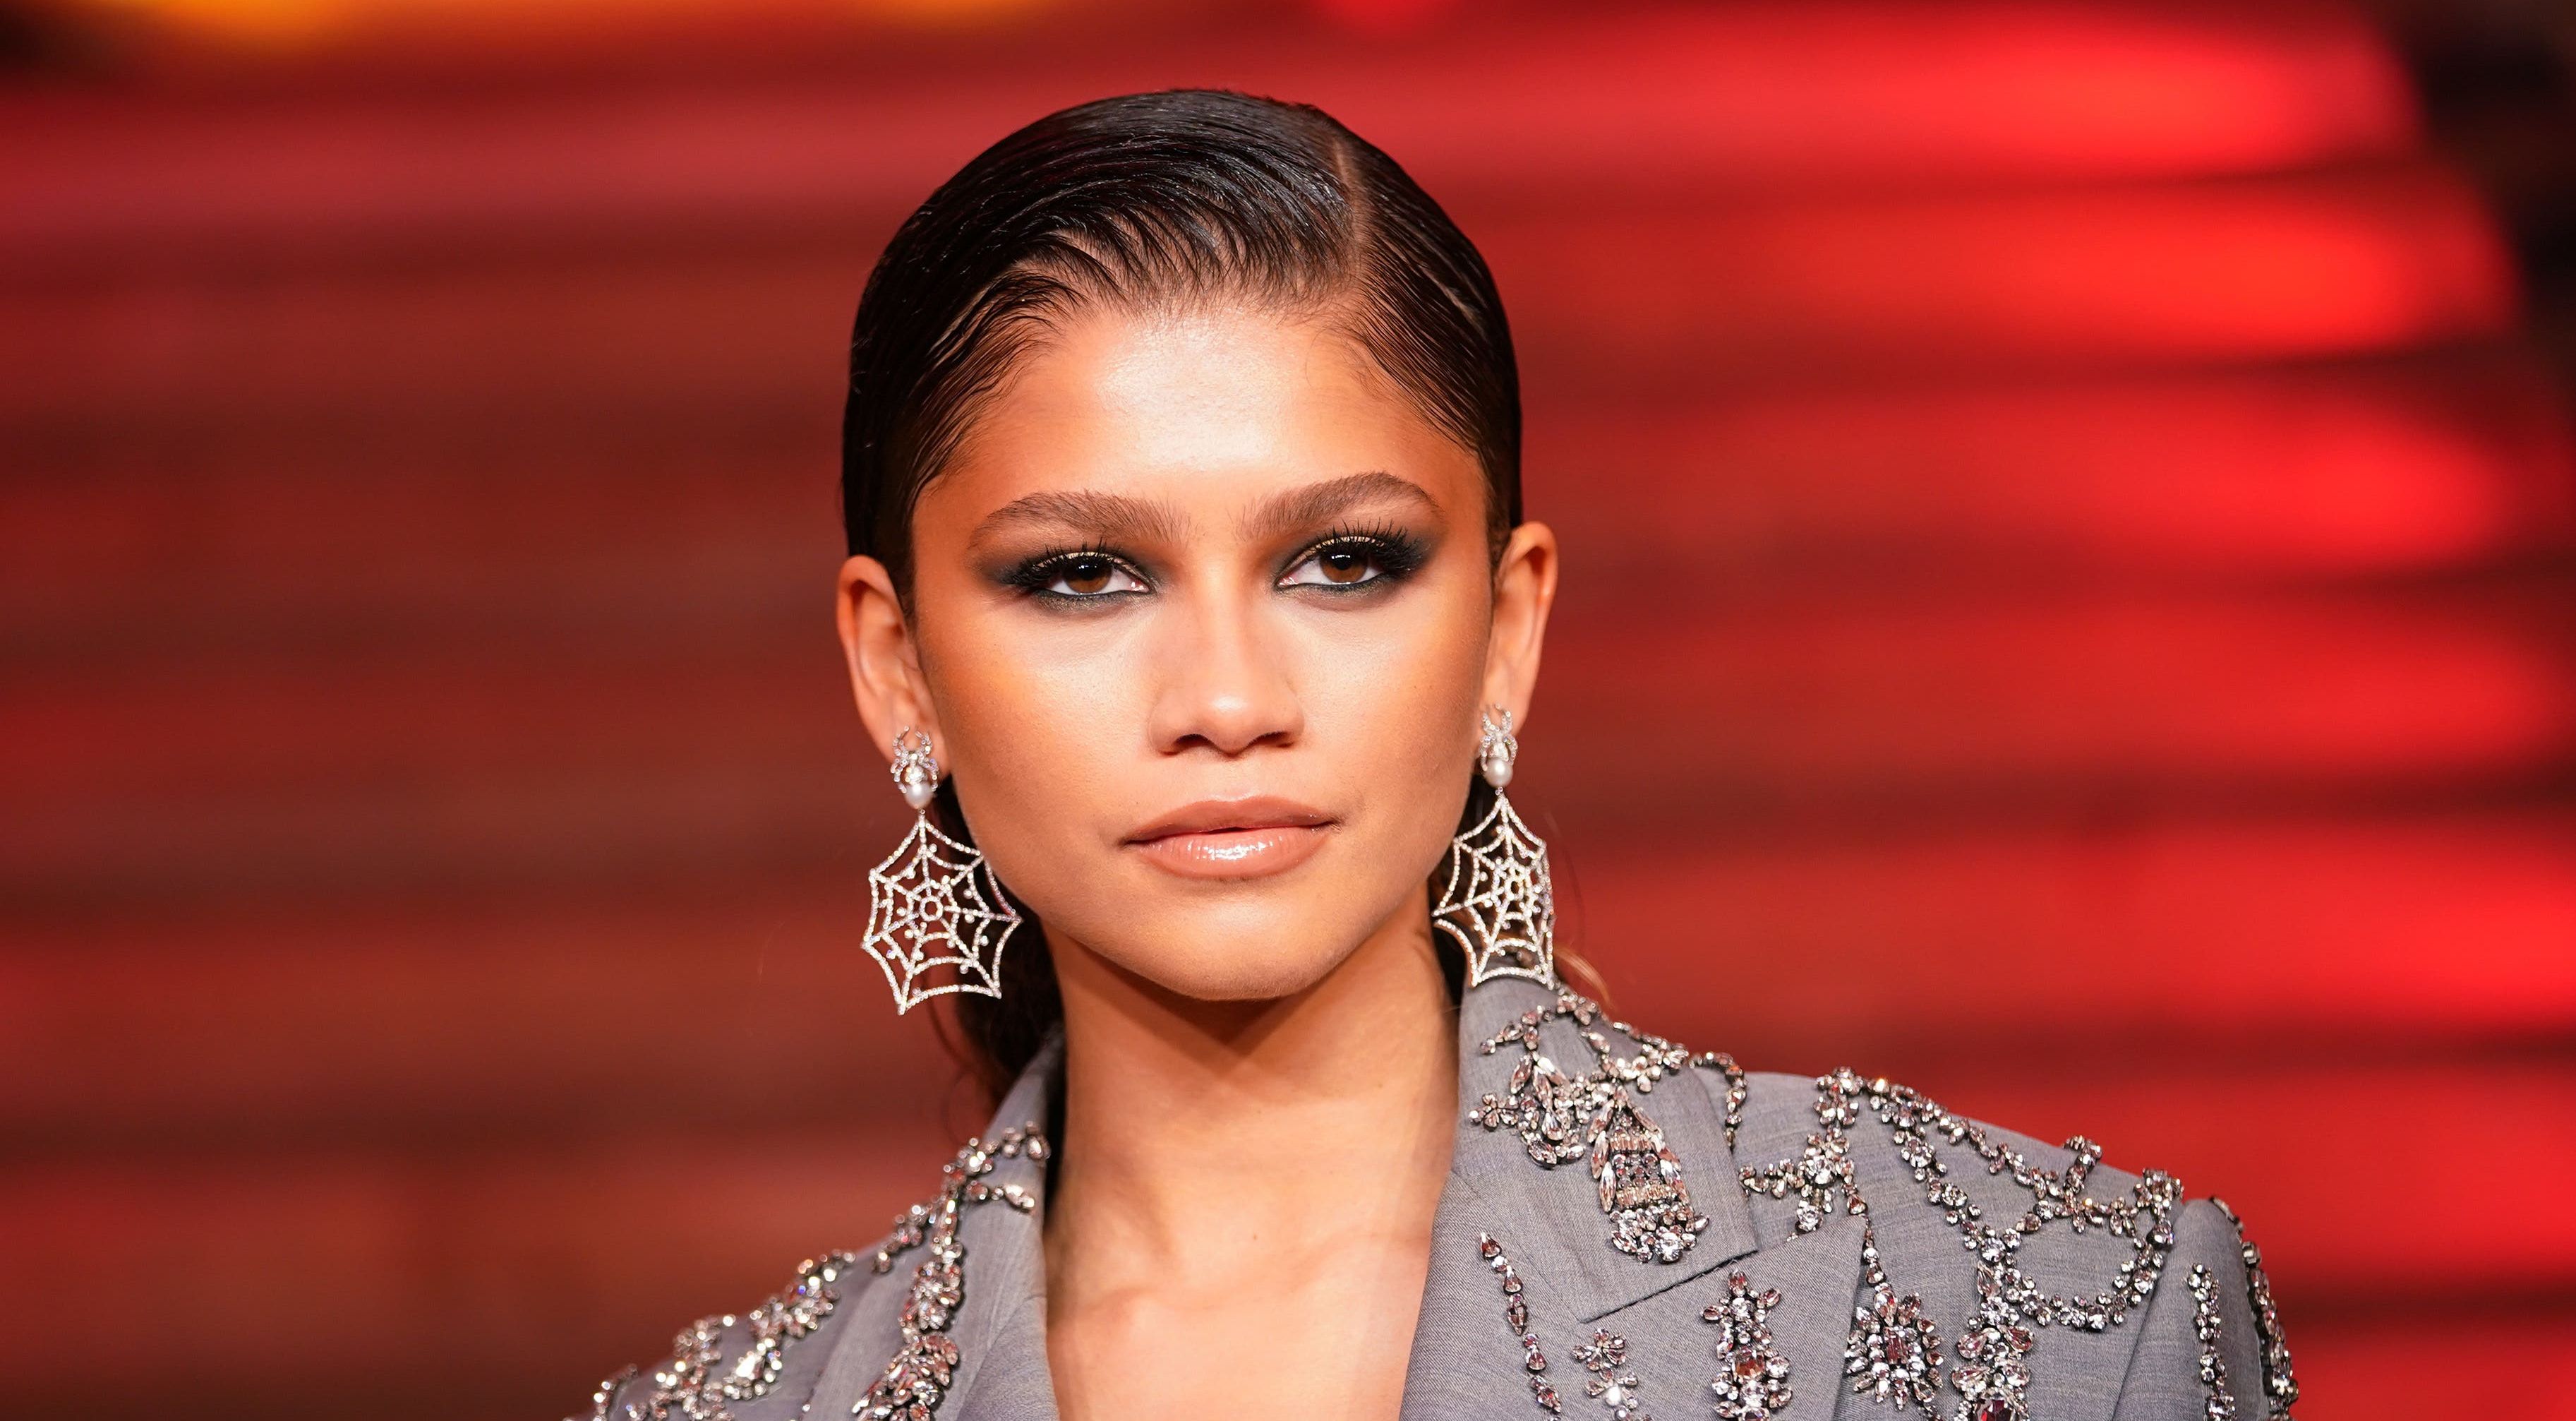 Zendaya returns to musical stage with surprise performance at Coachella |  Independent.ie